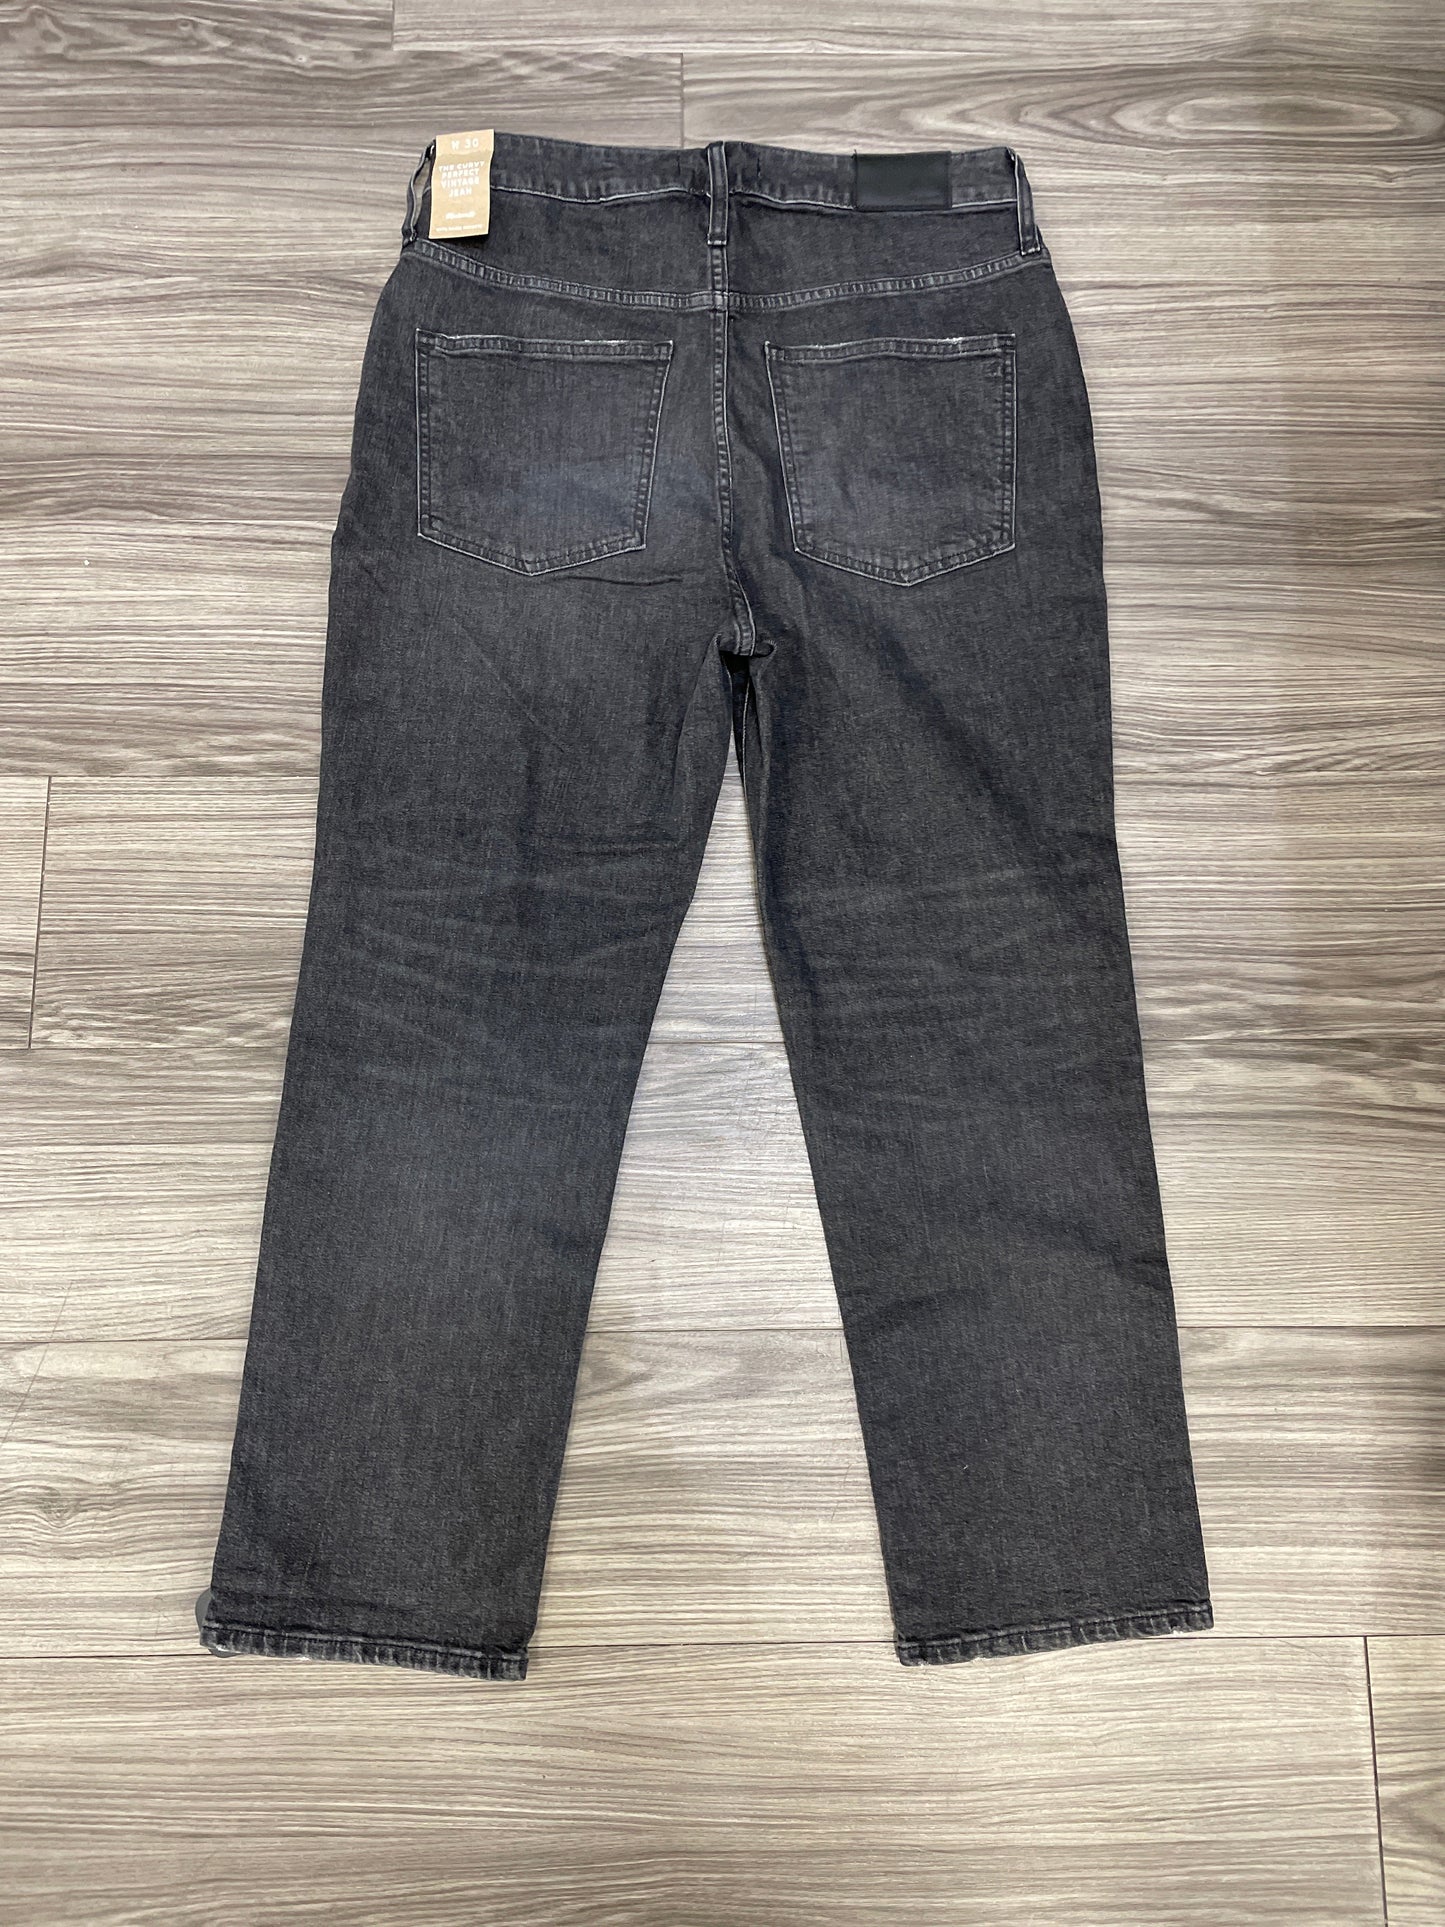 Black Jeans Straight Madewell, Size 8